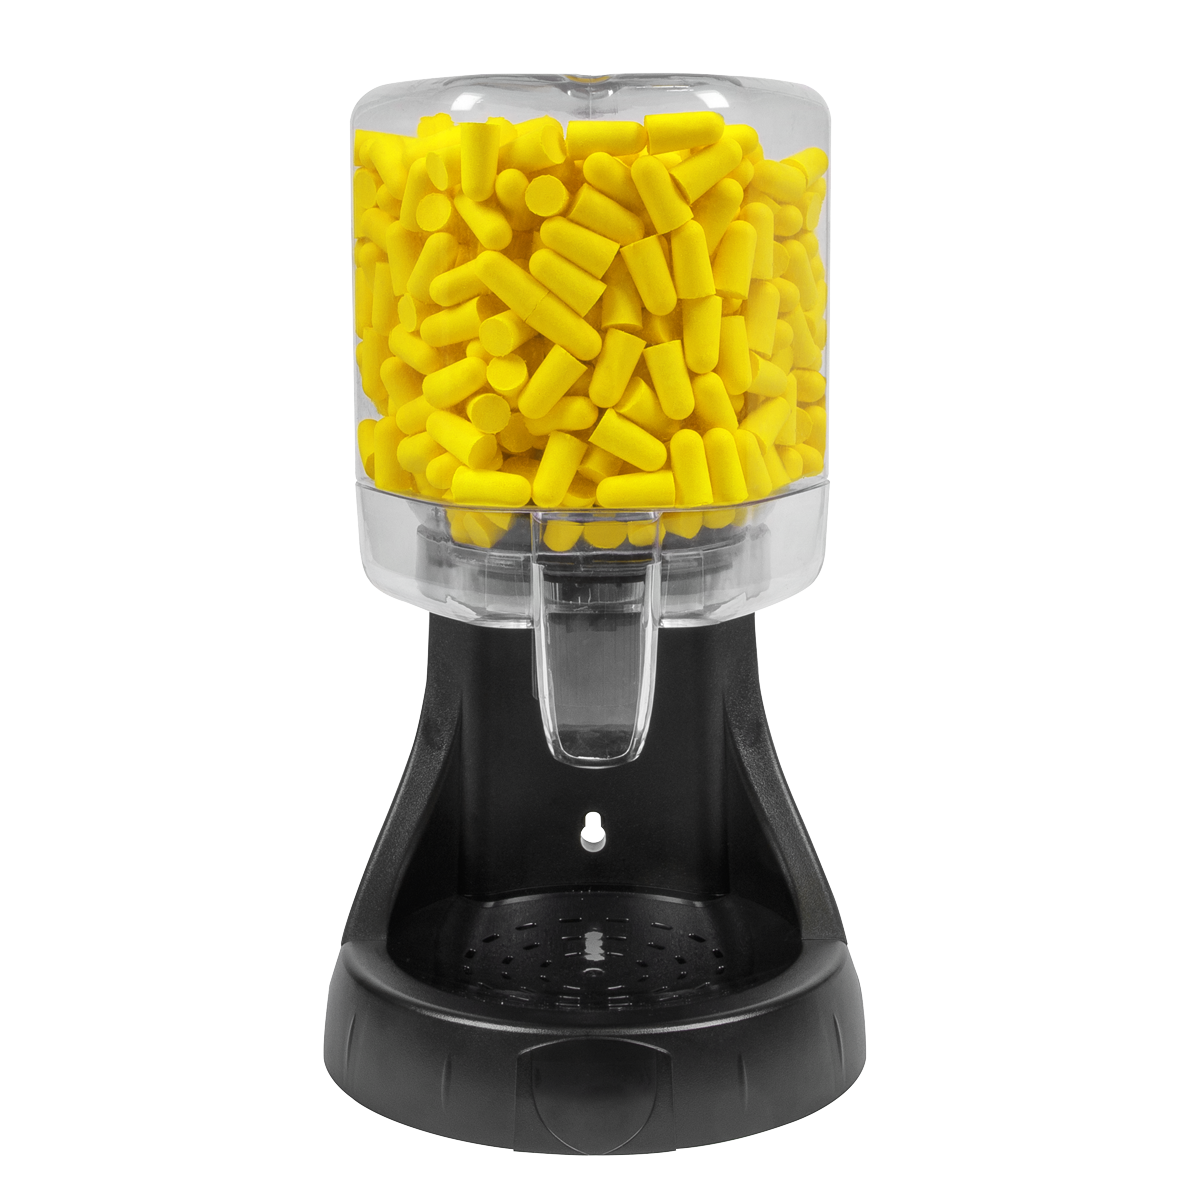 Sealey Disposable Ear Plugs Dispenser - 250 Pairs 403/250D